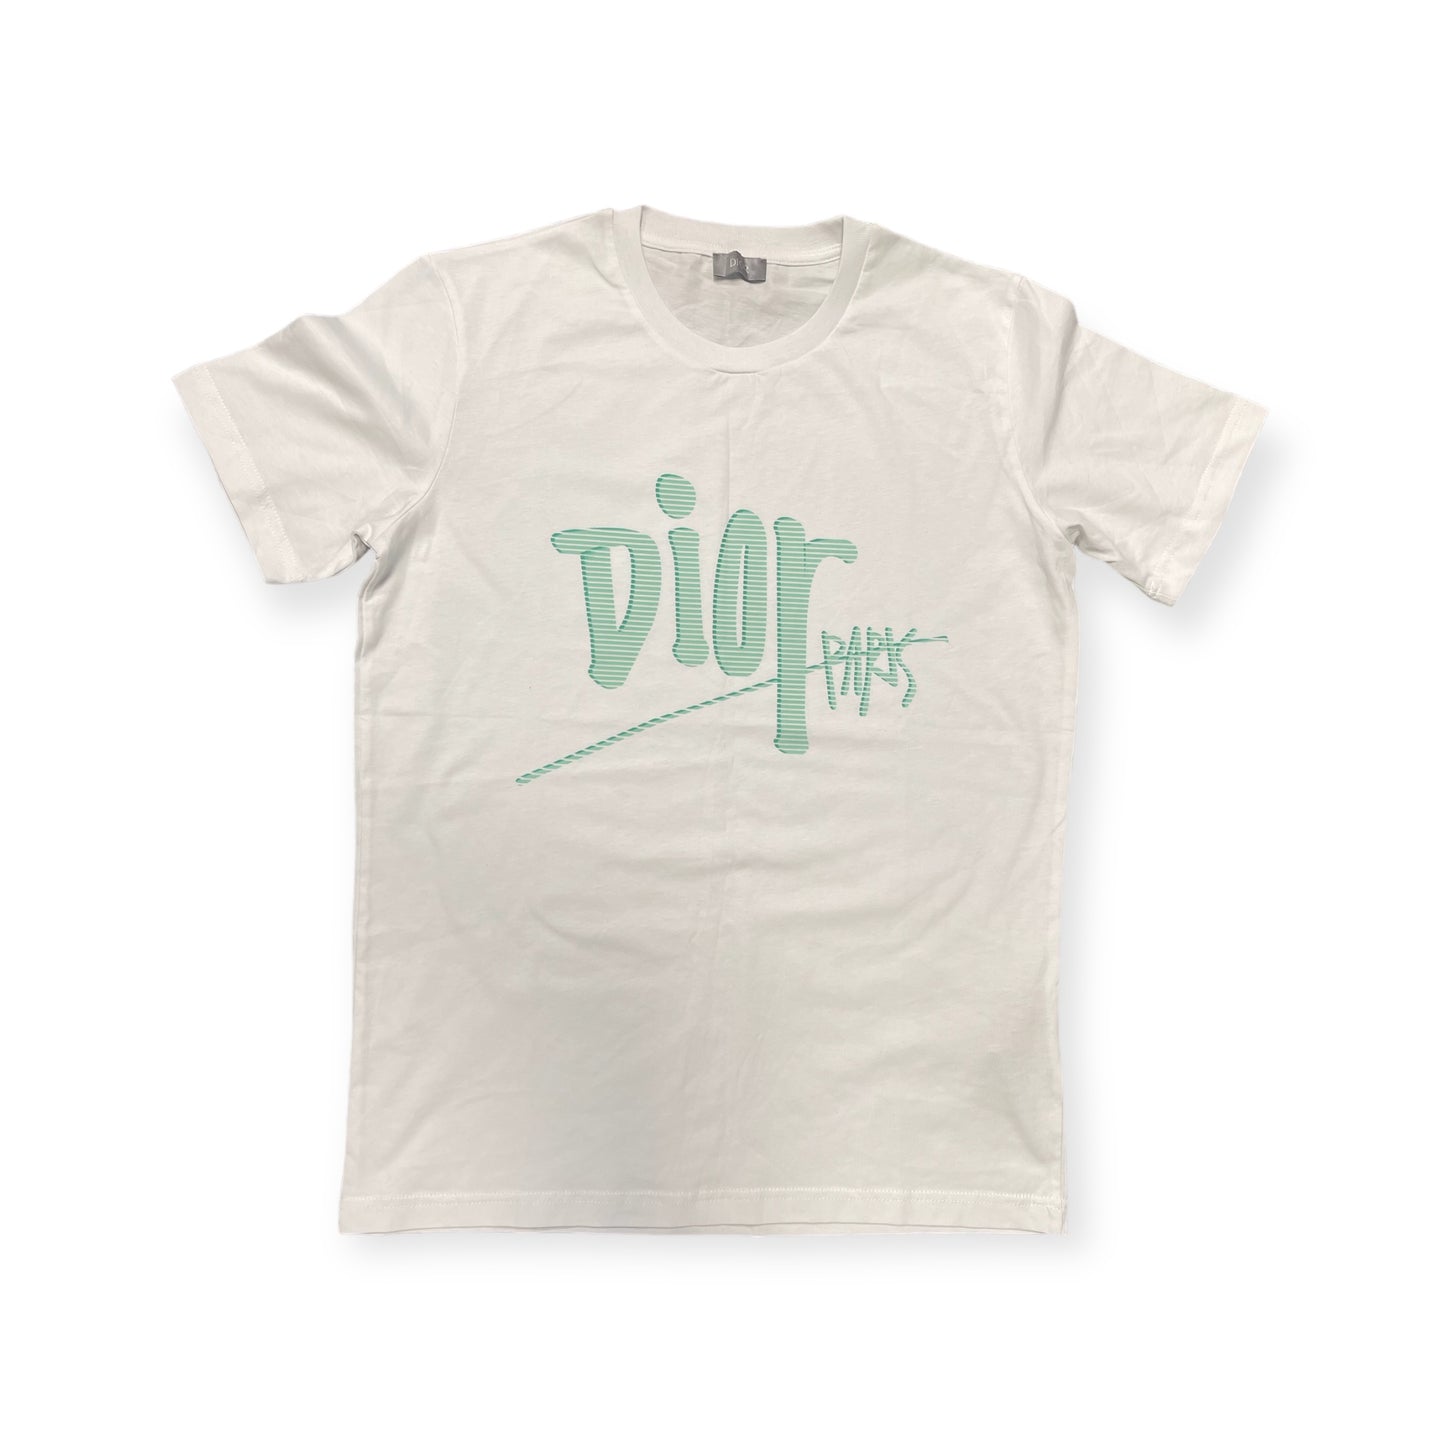 Brand New Dior Tee Size M